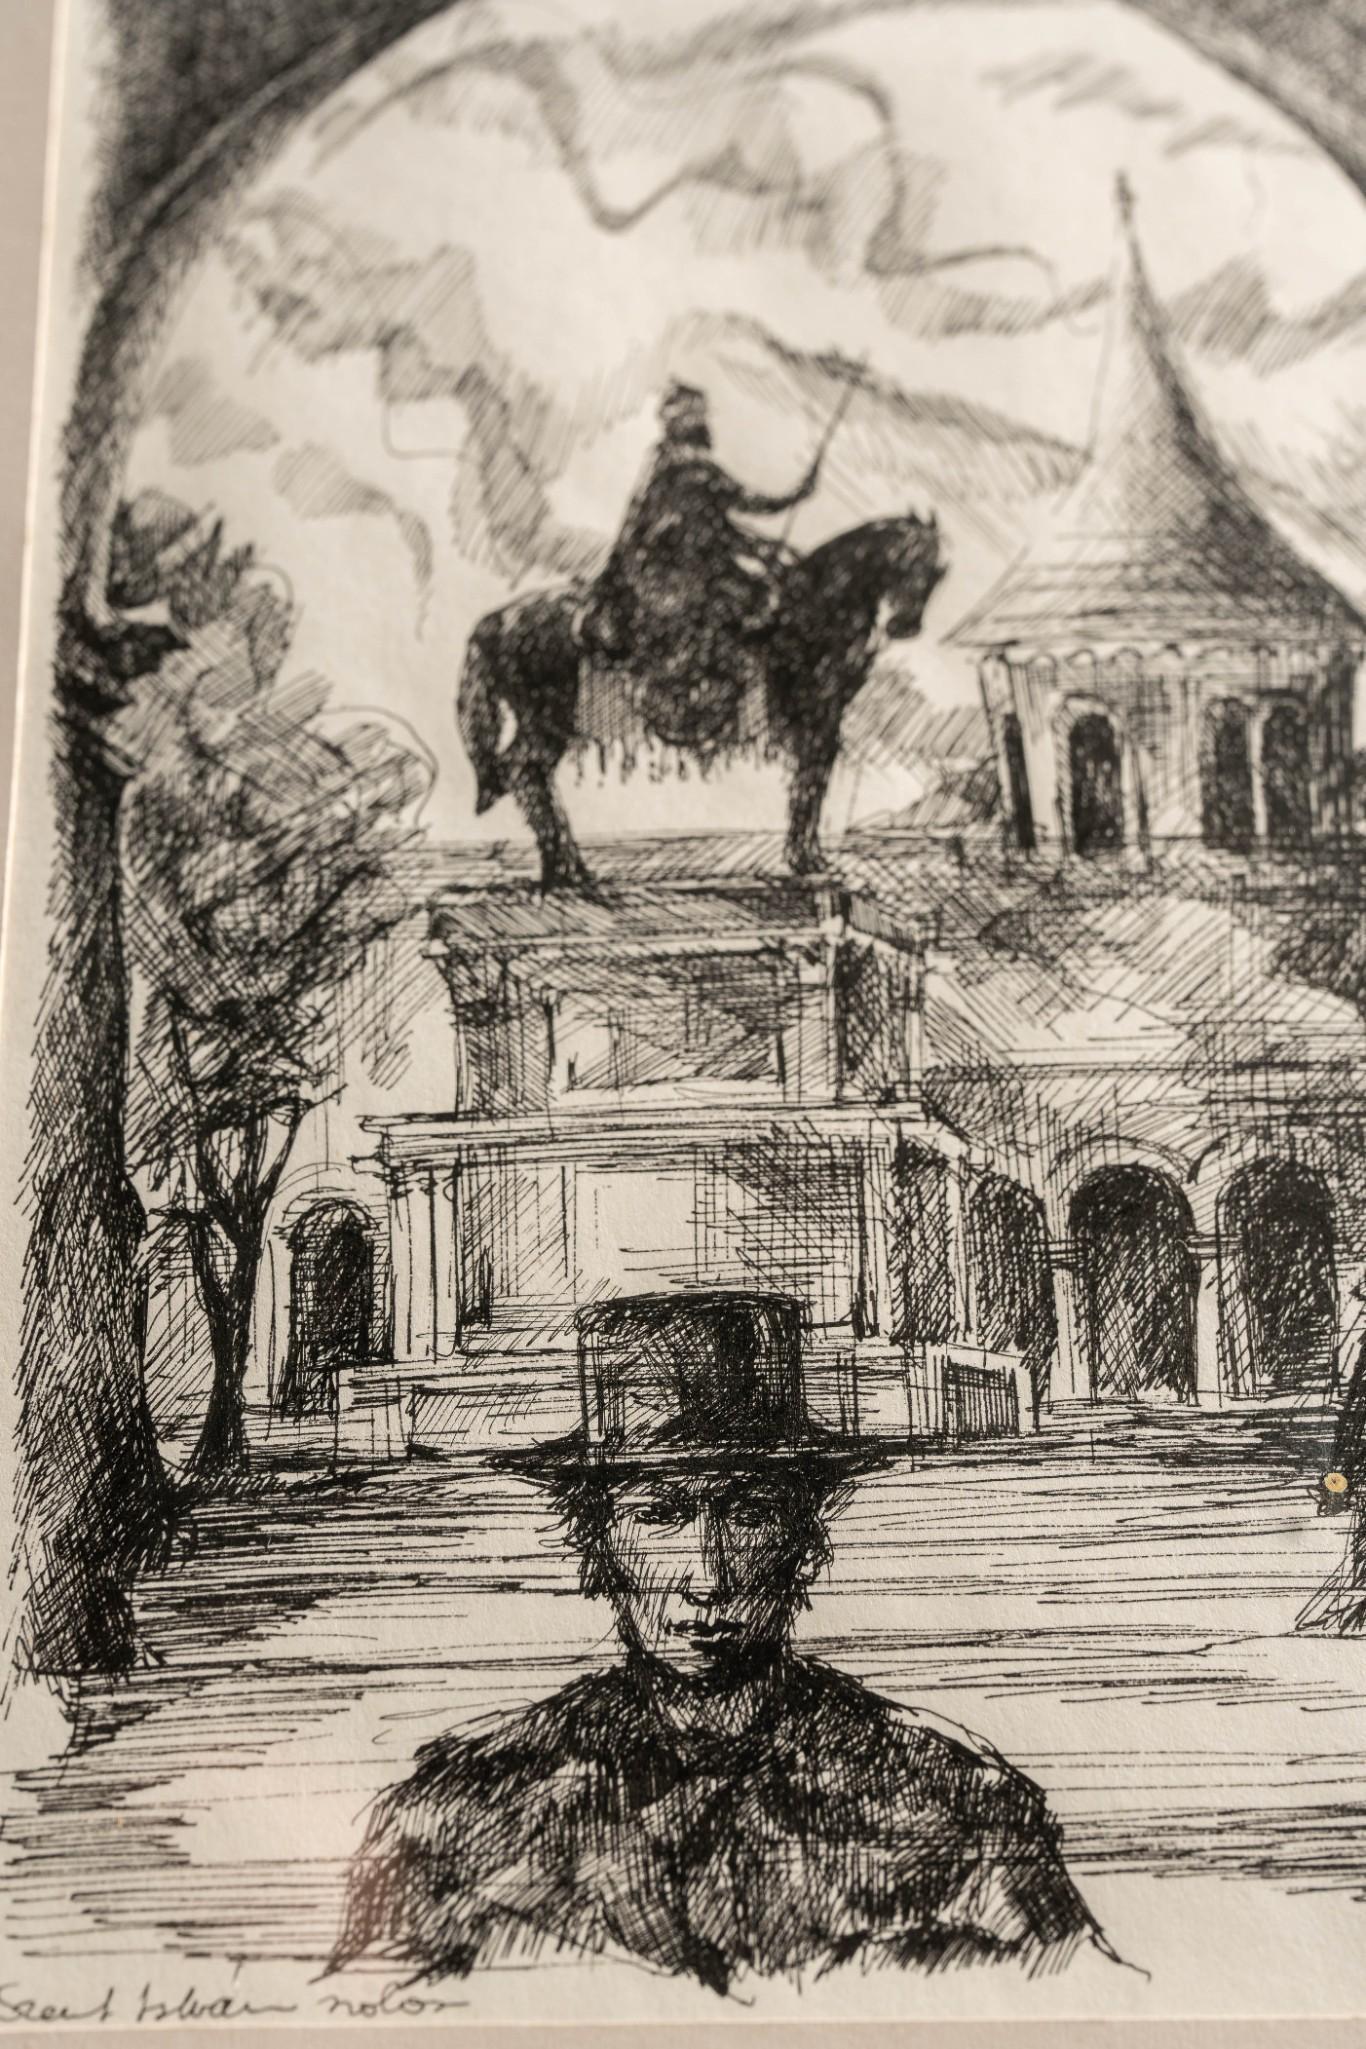 Illustration of City Street with Statue, Pen on Paper, 1987